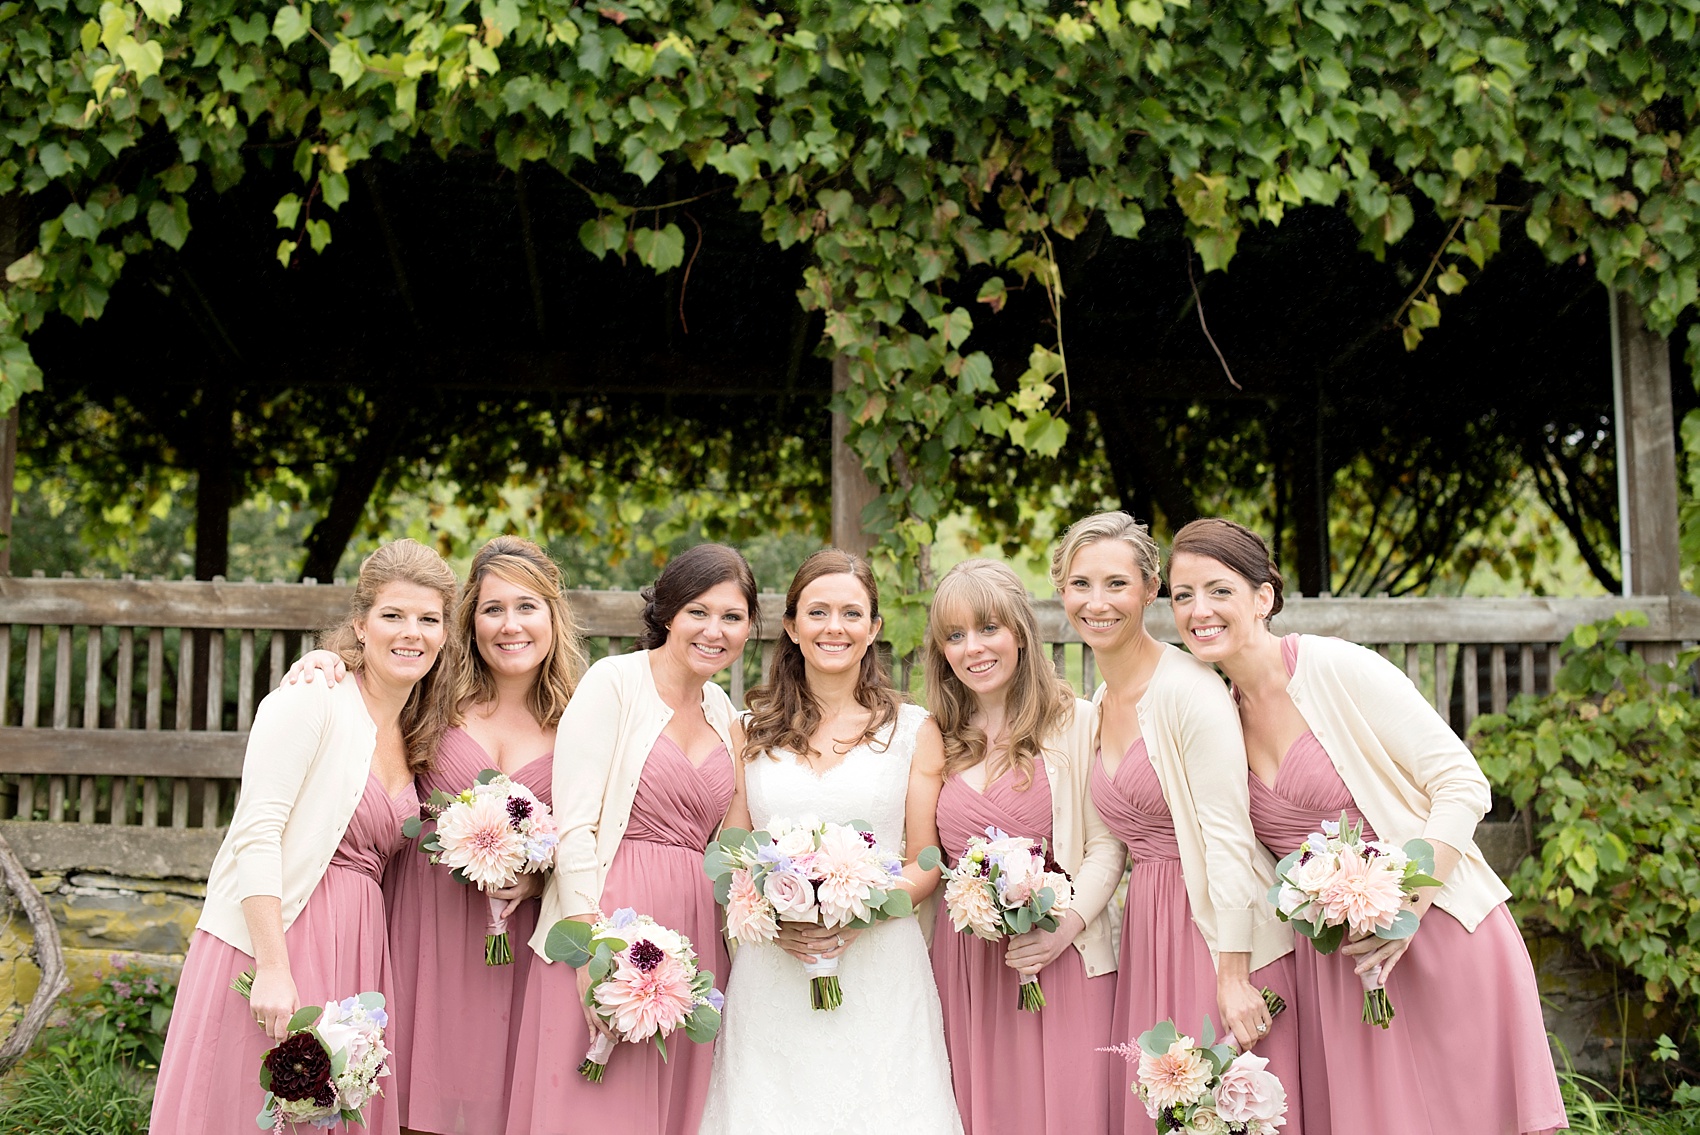 Red Maple Vineyard wedding. Photos by Mikkel Paige Photography. Bridesmaids in dusty rose short dresses and off white cardigans.